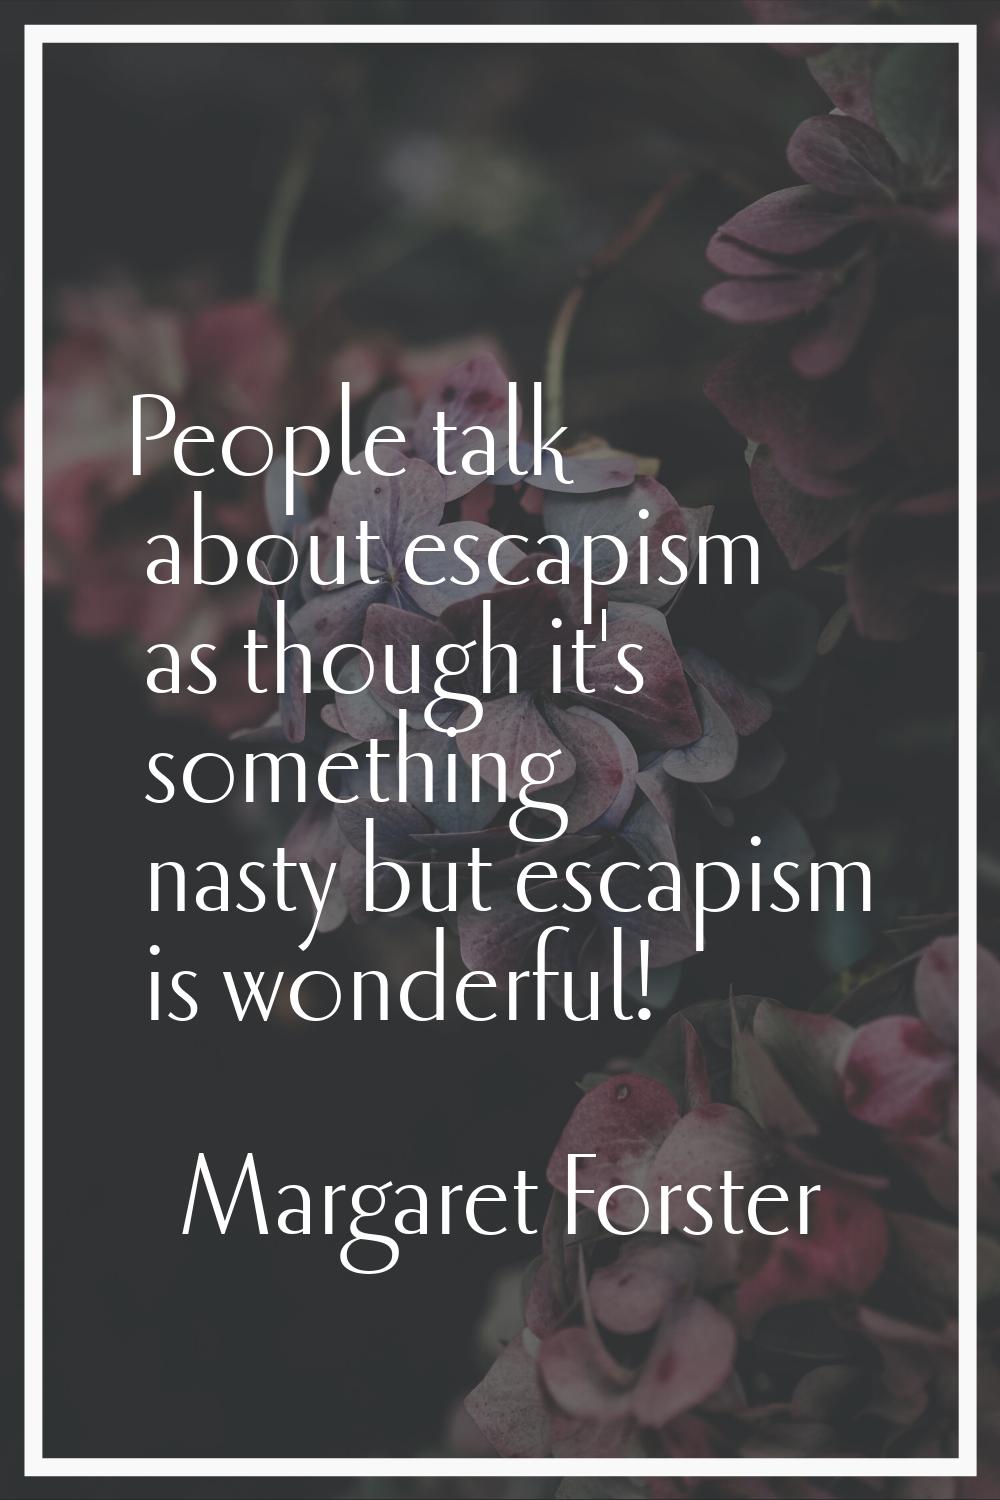 People talk about escapism as though it's something nasty but escapism is wonderful!